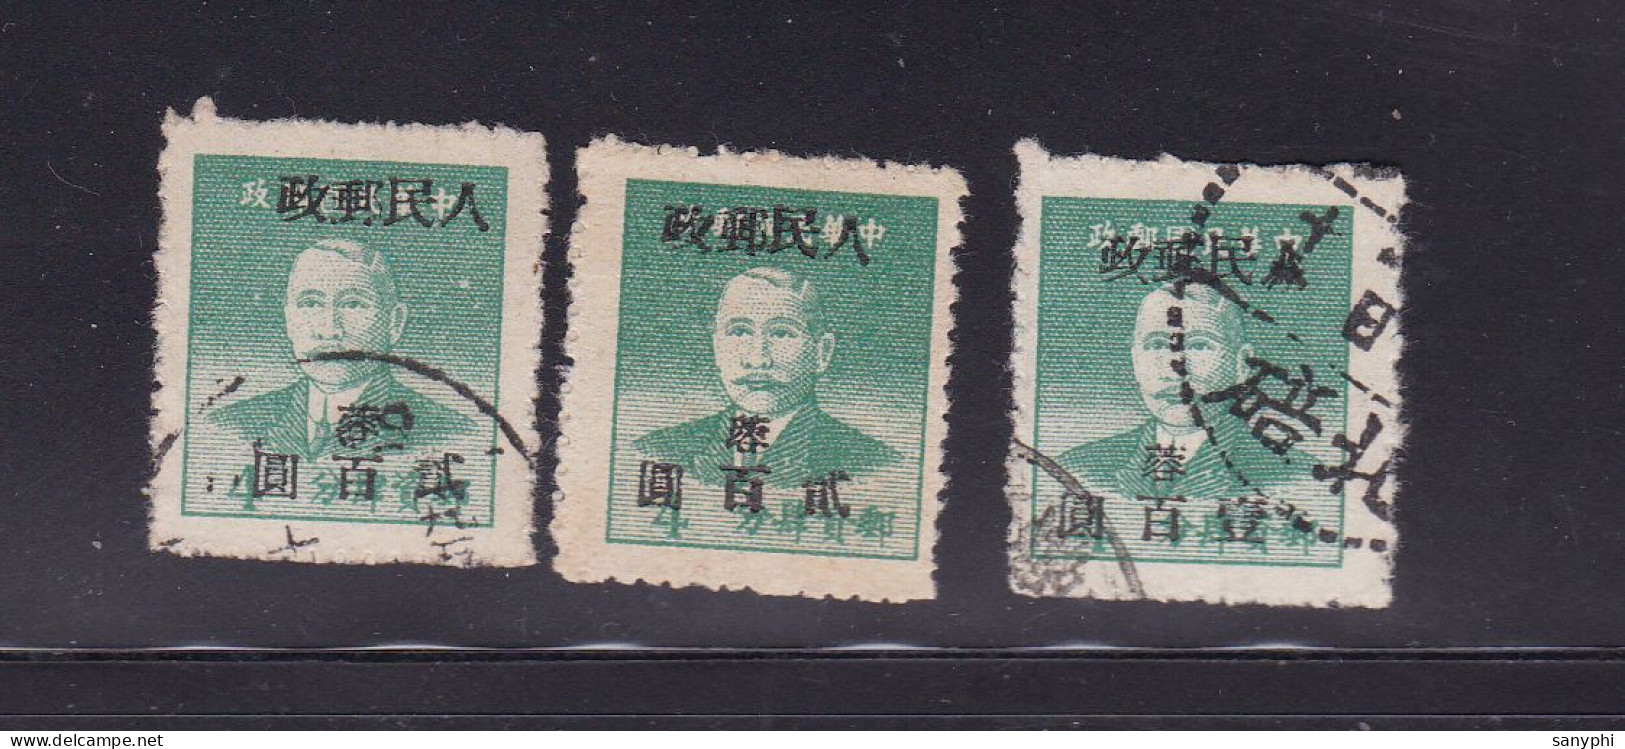 China Chine 1950 Gold Yuan Optd West Sichuan People's Posts 3 Used Stamps - Ostchina 1949-50